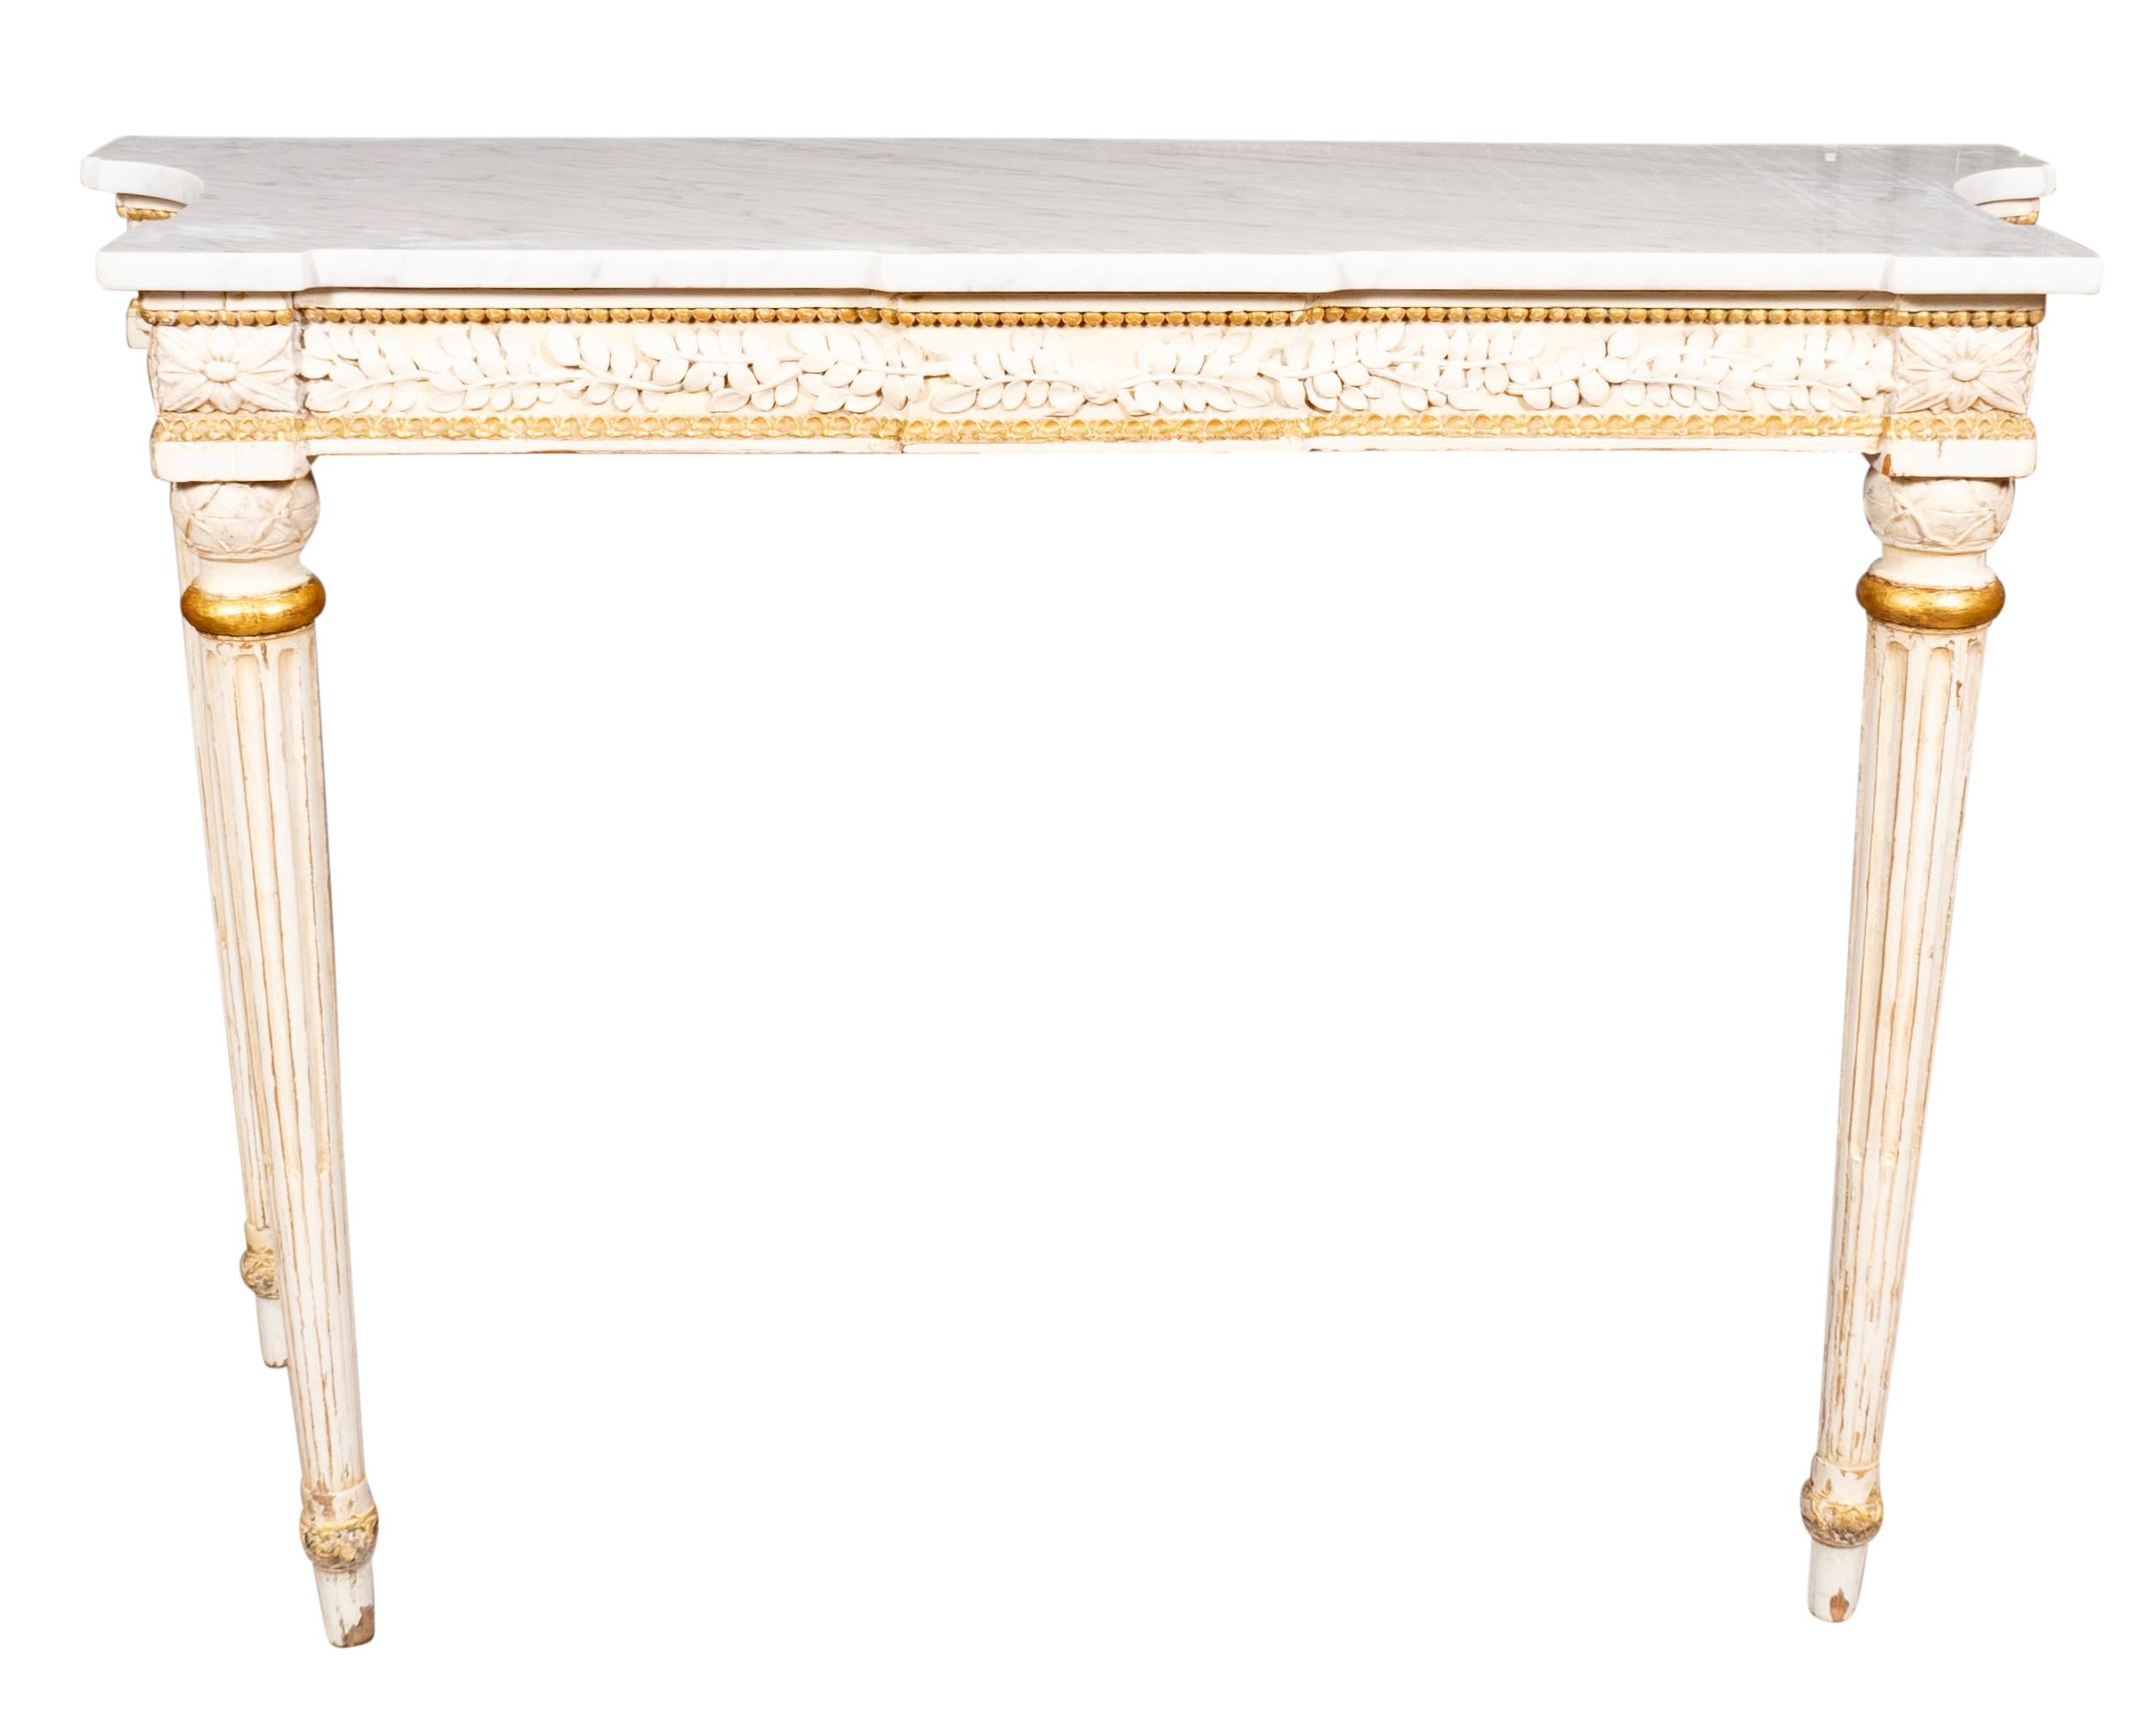 With rectangular white Carrara marble tops with a conforming creme painted frieze with finely carved leaves. Raised on circular tapered fluted legs with a touch of gilding at top of legs. With metal labels on back 